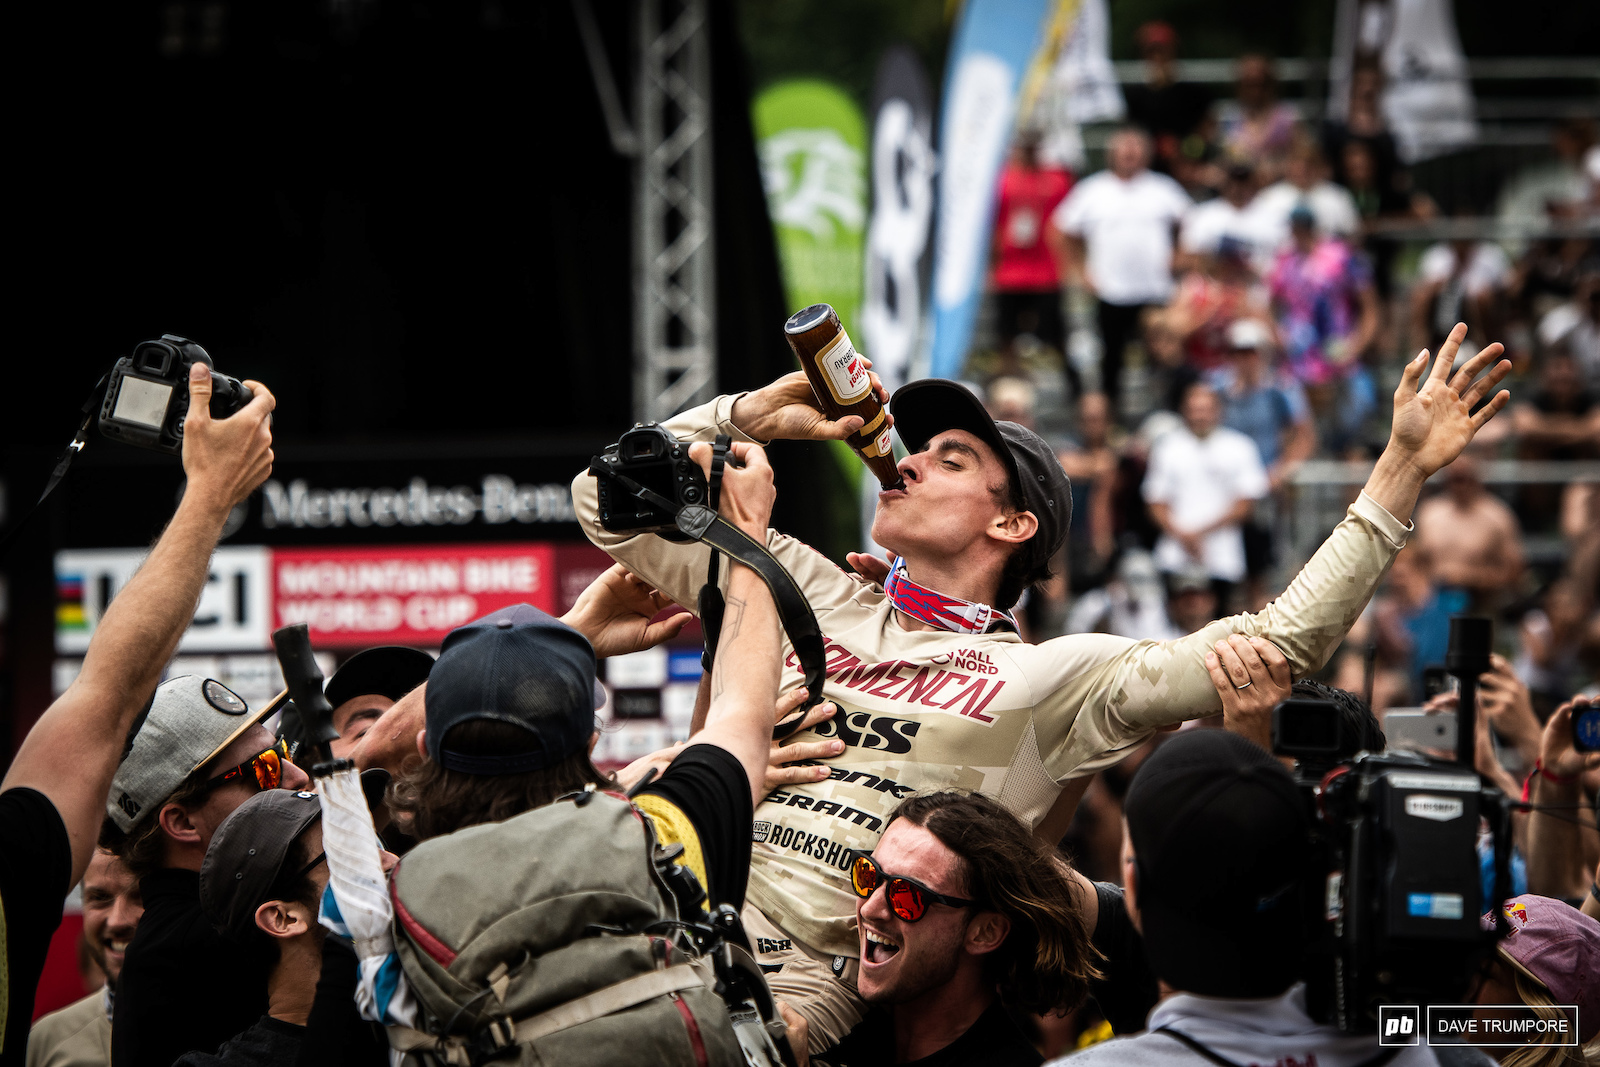 One week later and it s a similar scene in the finish arena as Amaury Pierron celebrates a win on the shoulders of his Commencal teammates.